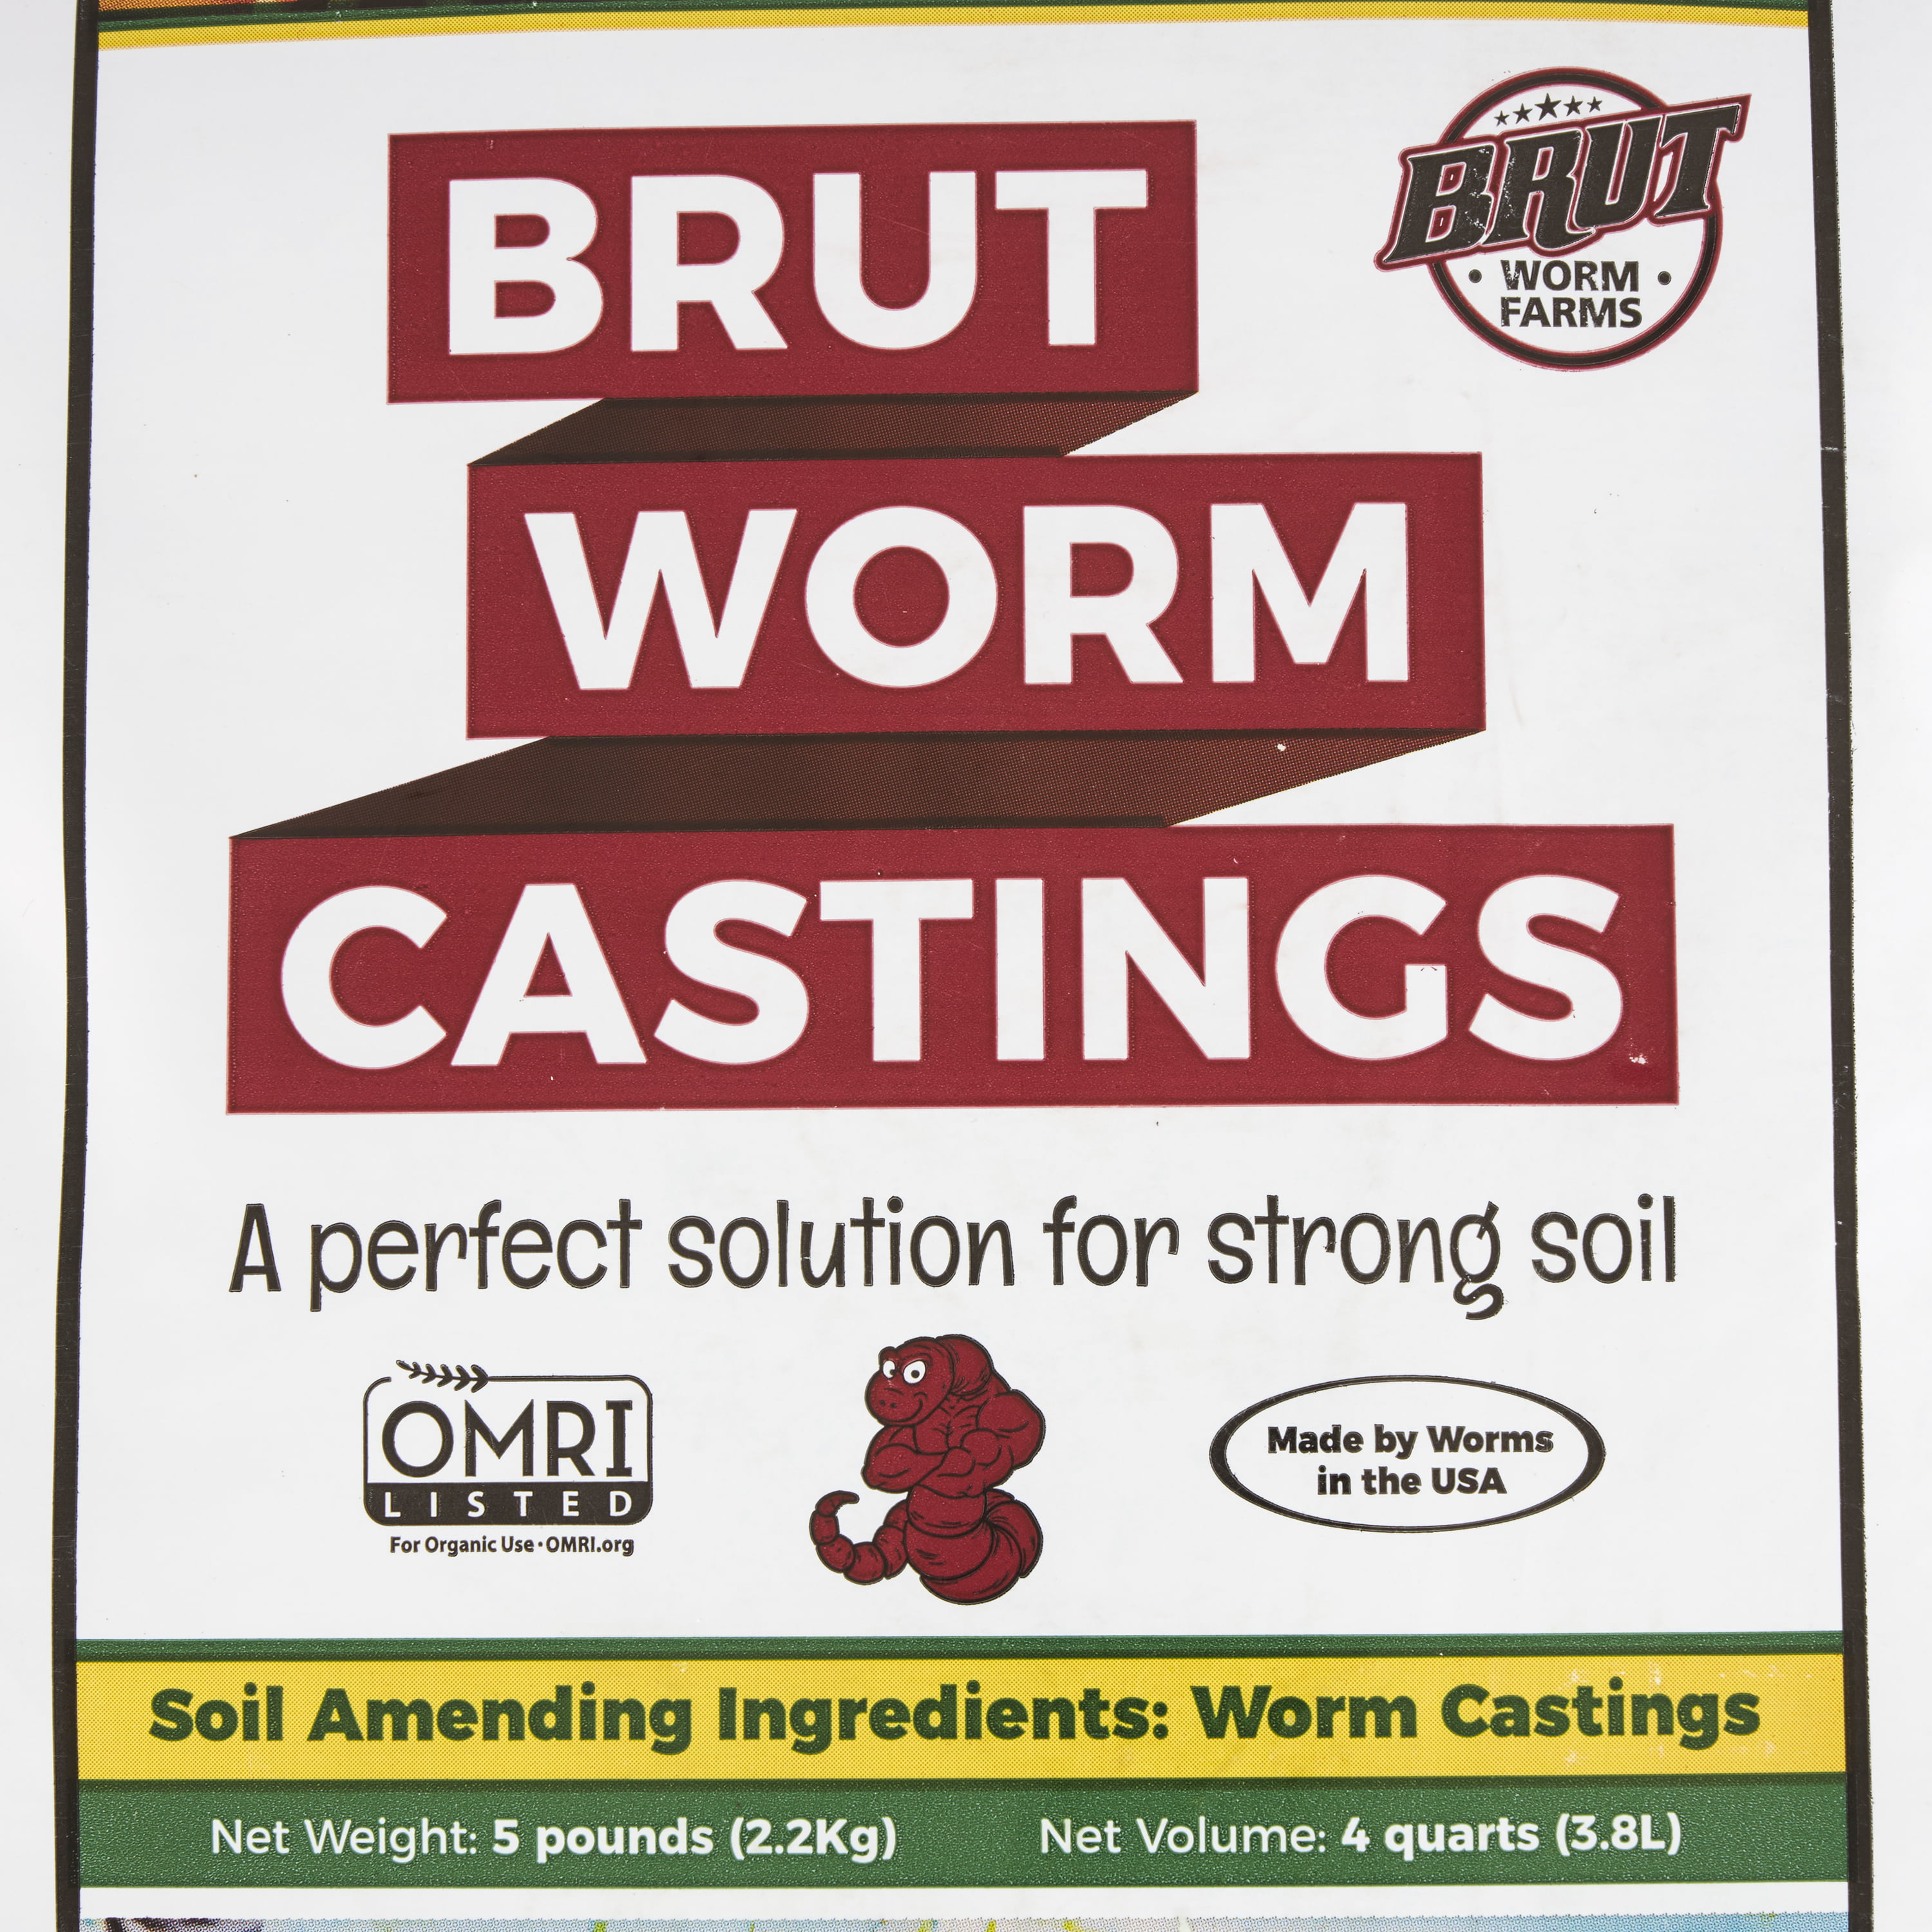 Flowers Organic Fertilizer Use Indoors or Outdoors Natural Enricher for Healthy Houseplants Non-Toxic and Odor Free 5 Pounds and Vegetables Worm Castings Soil Builder Brut Worm Farms 